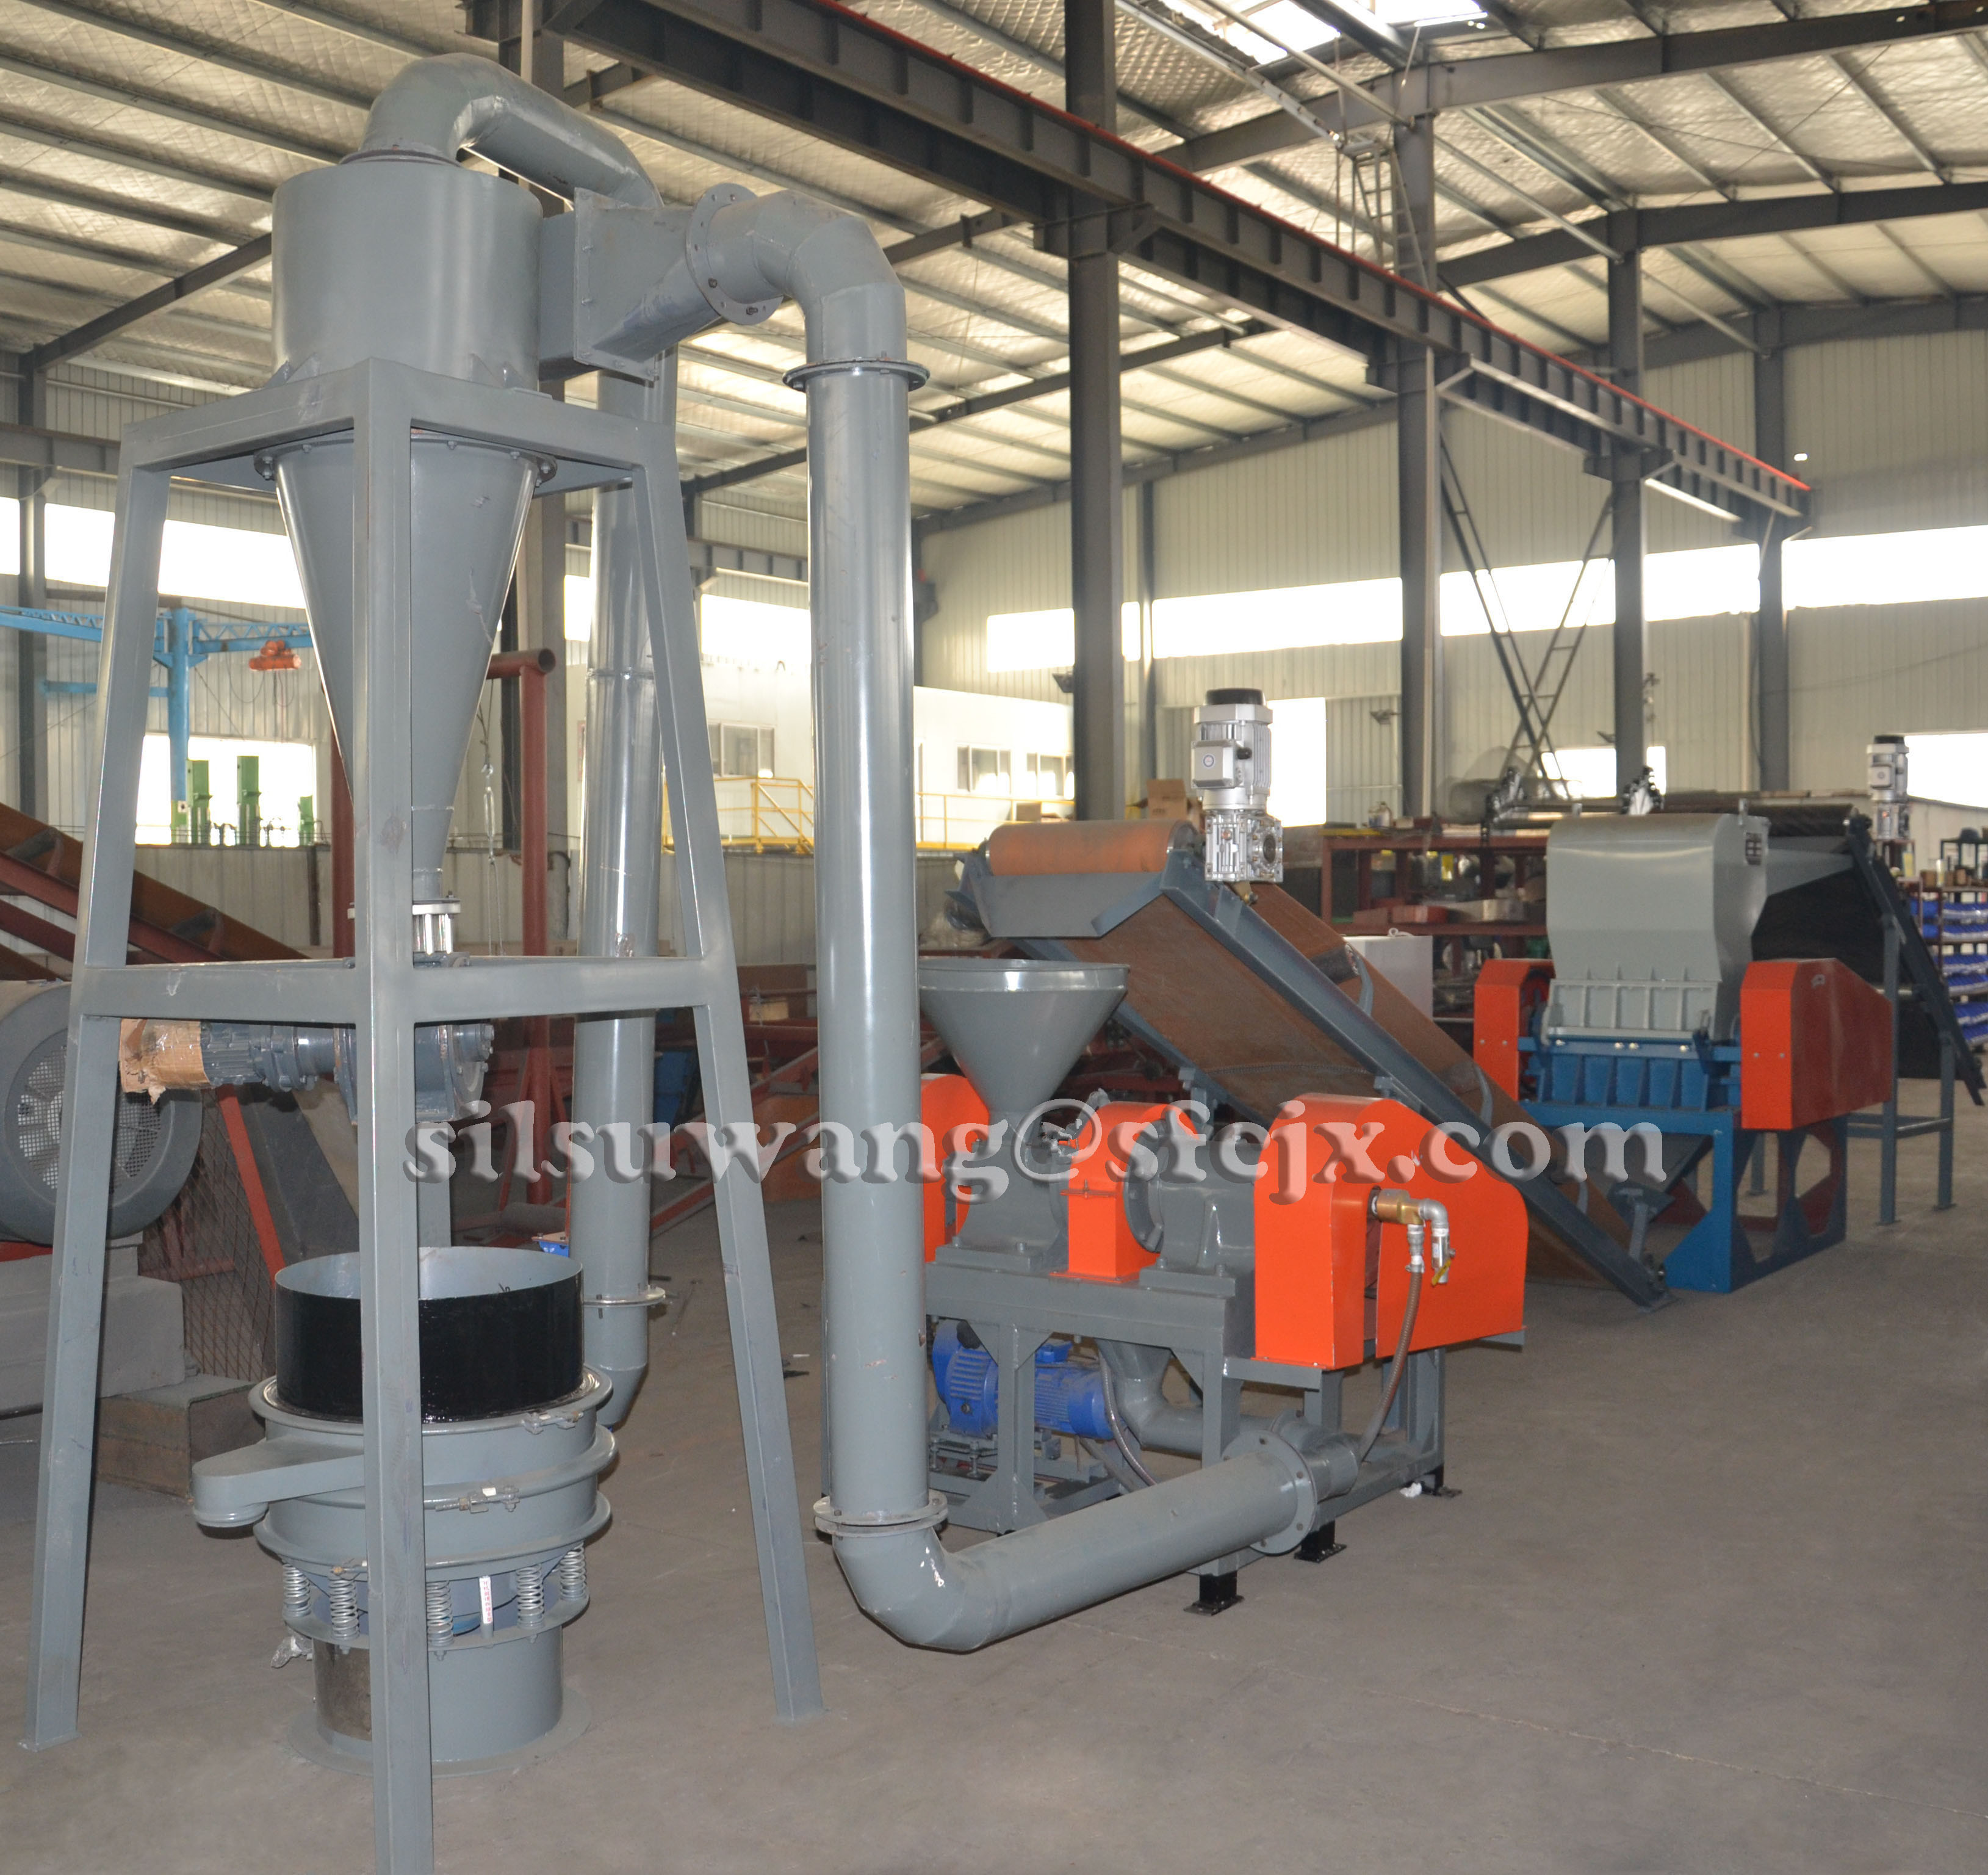  OEM ODM Rubber Powder Production Line Manufactures